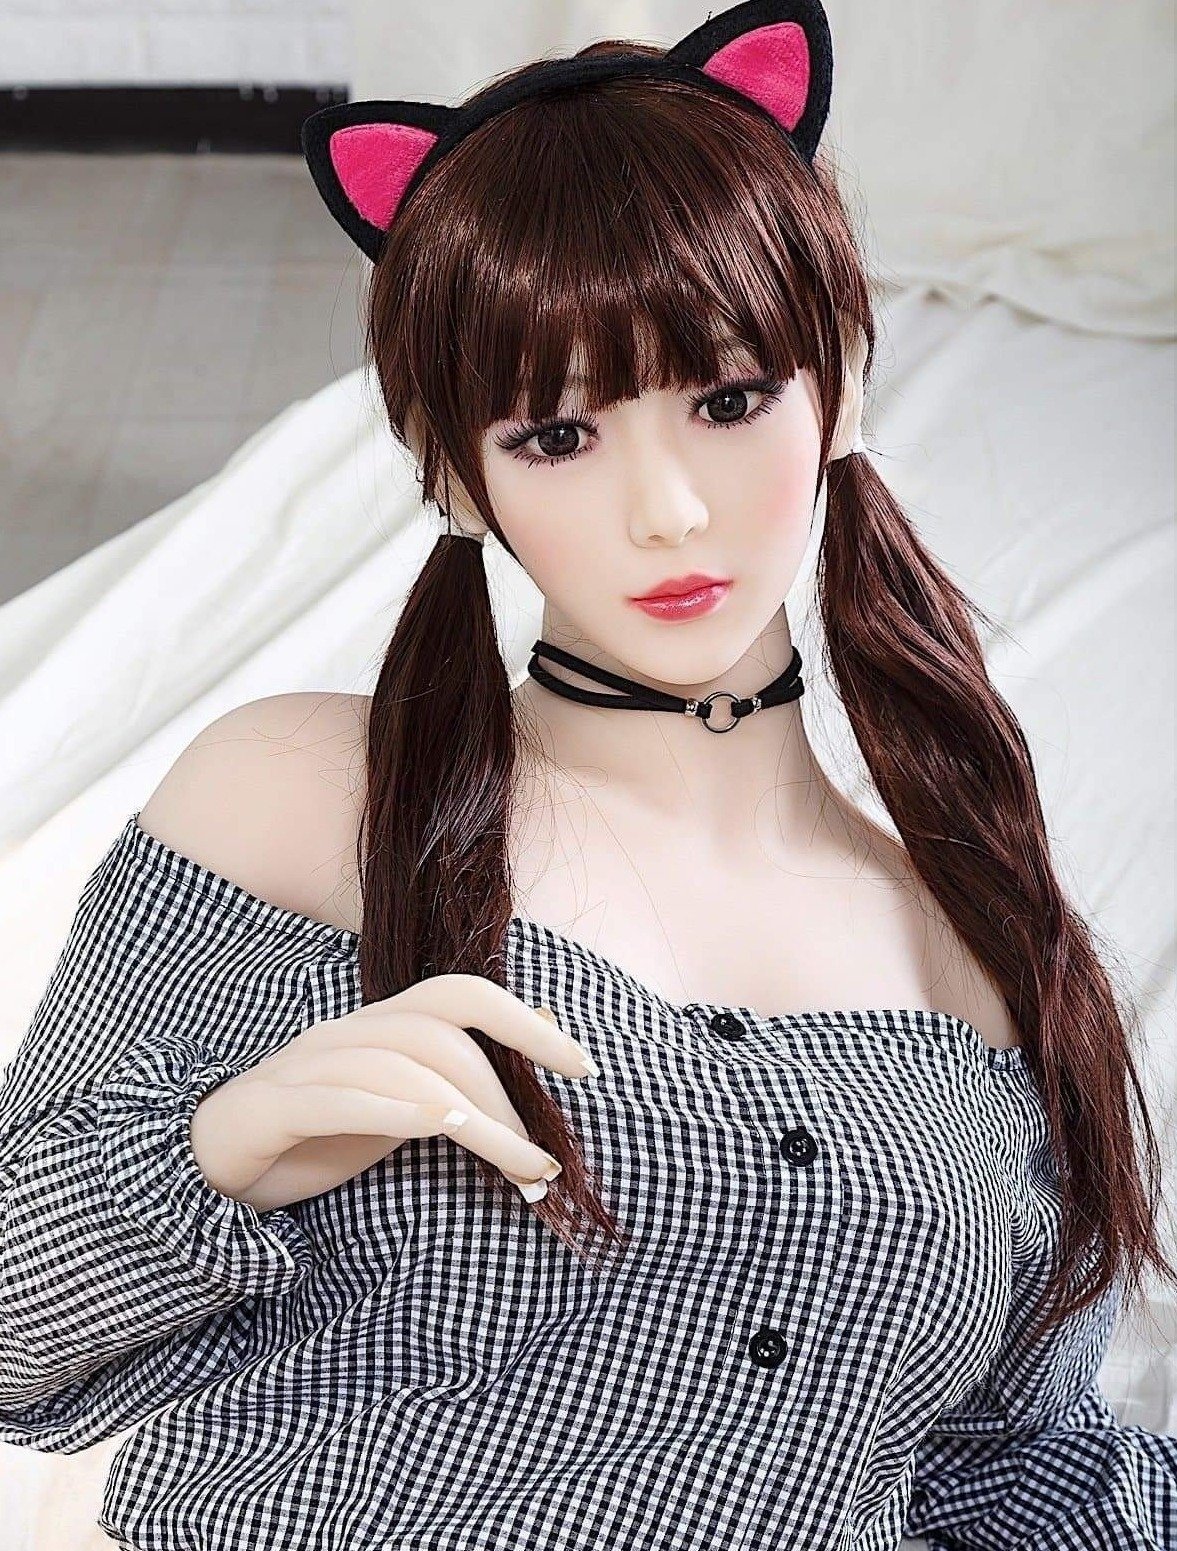 Buy Best Tpe Aibei Doll Tpesexdoll Tagged Aibei Doll 158cm